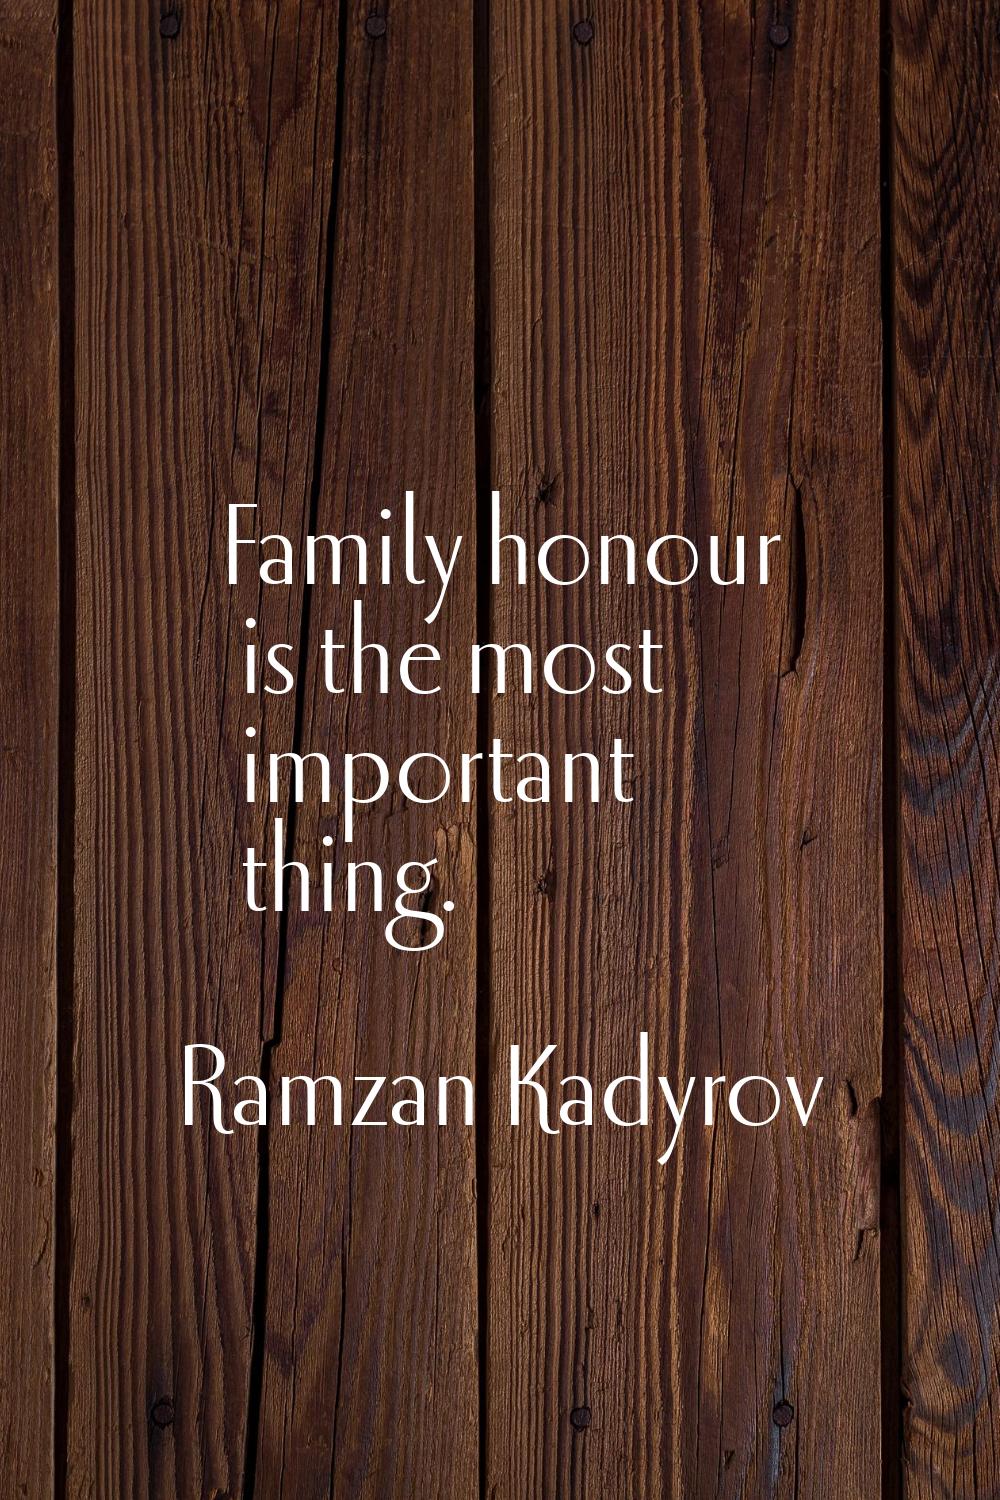 Family honour is the most important thing.